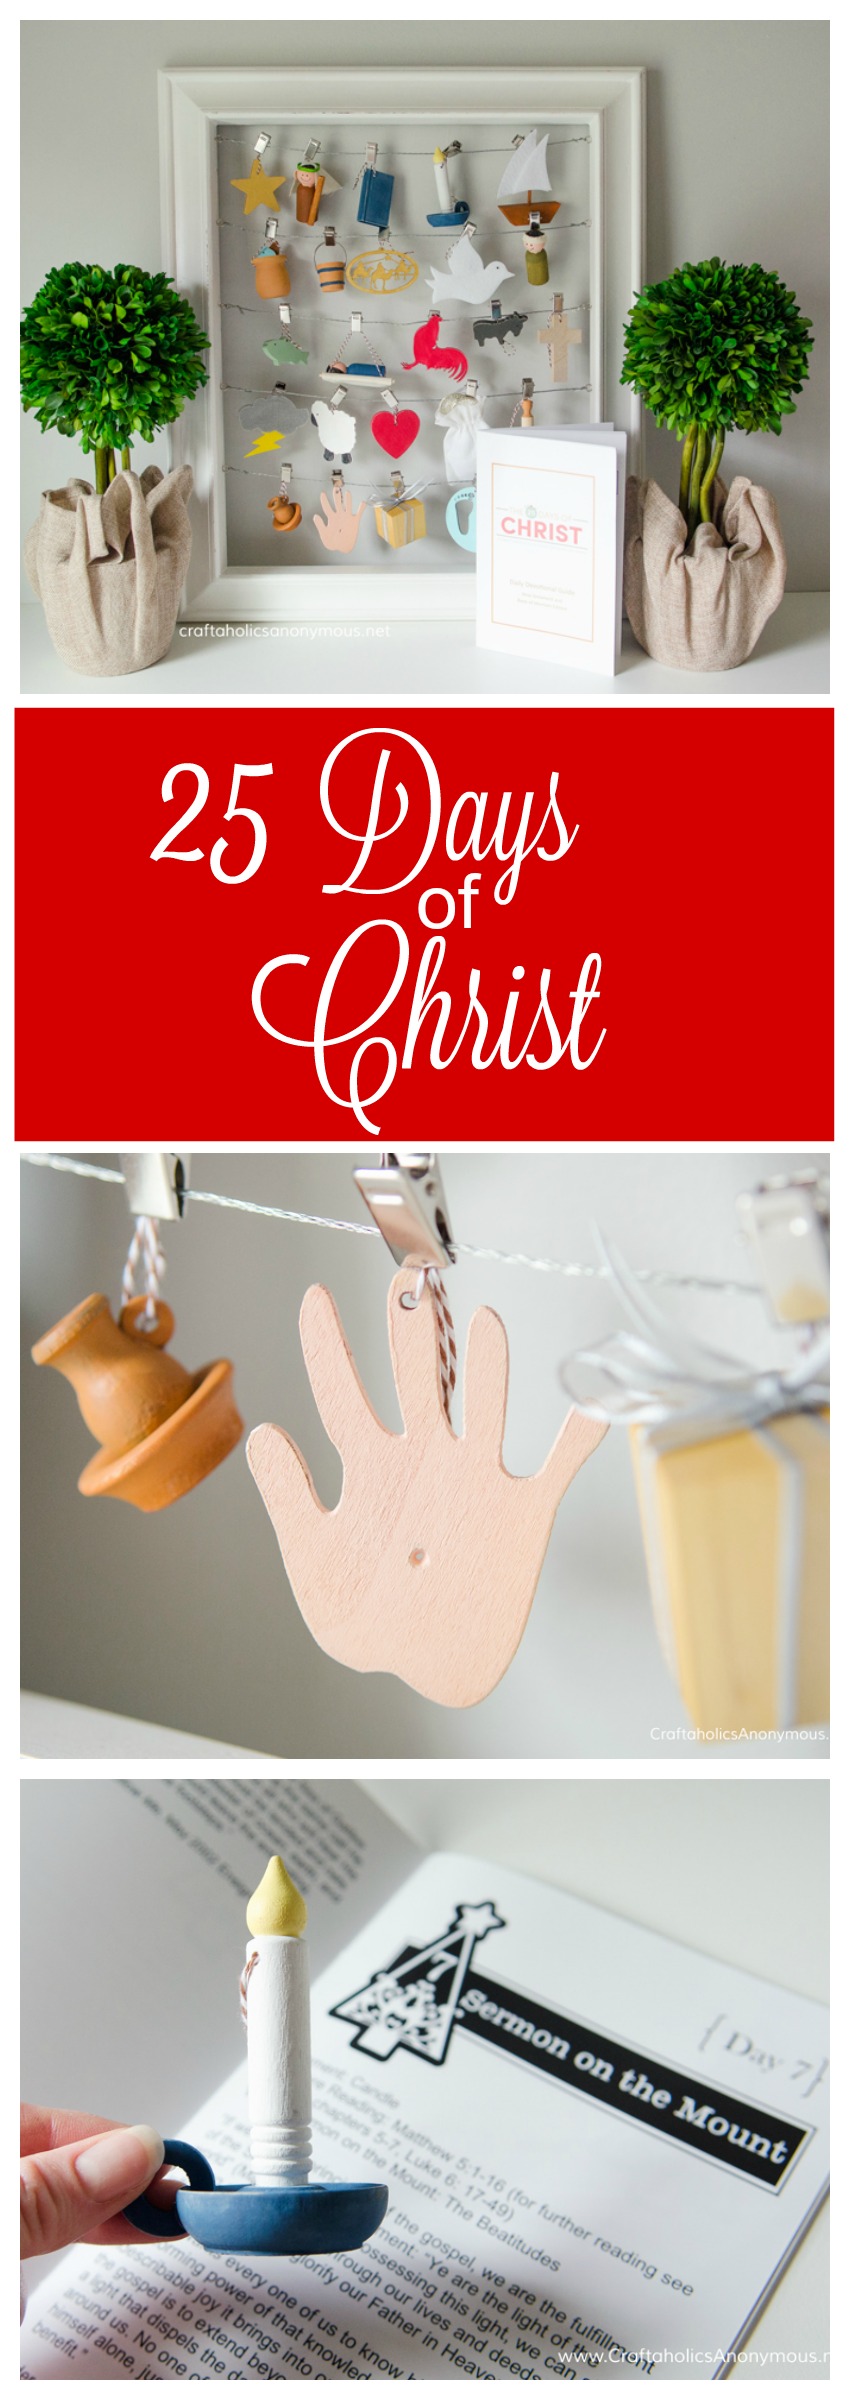 25 Days of Christ || Help your family keep Christ at the center of Christmas with this new family tradition!